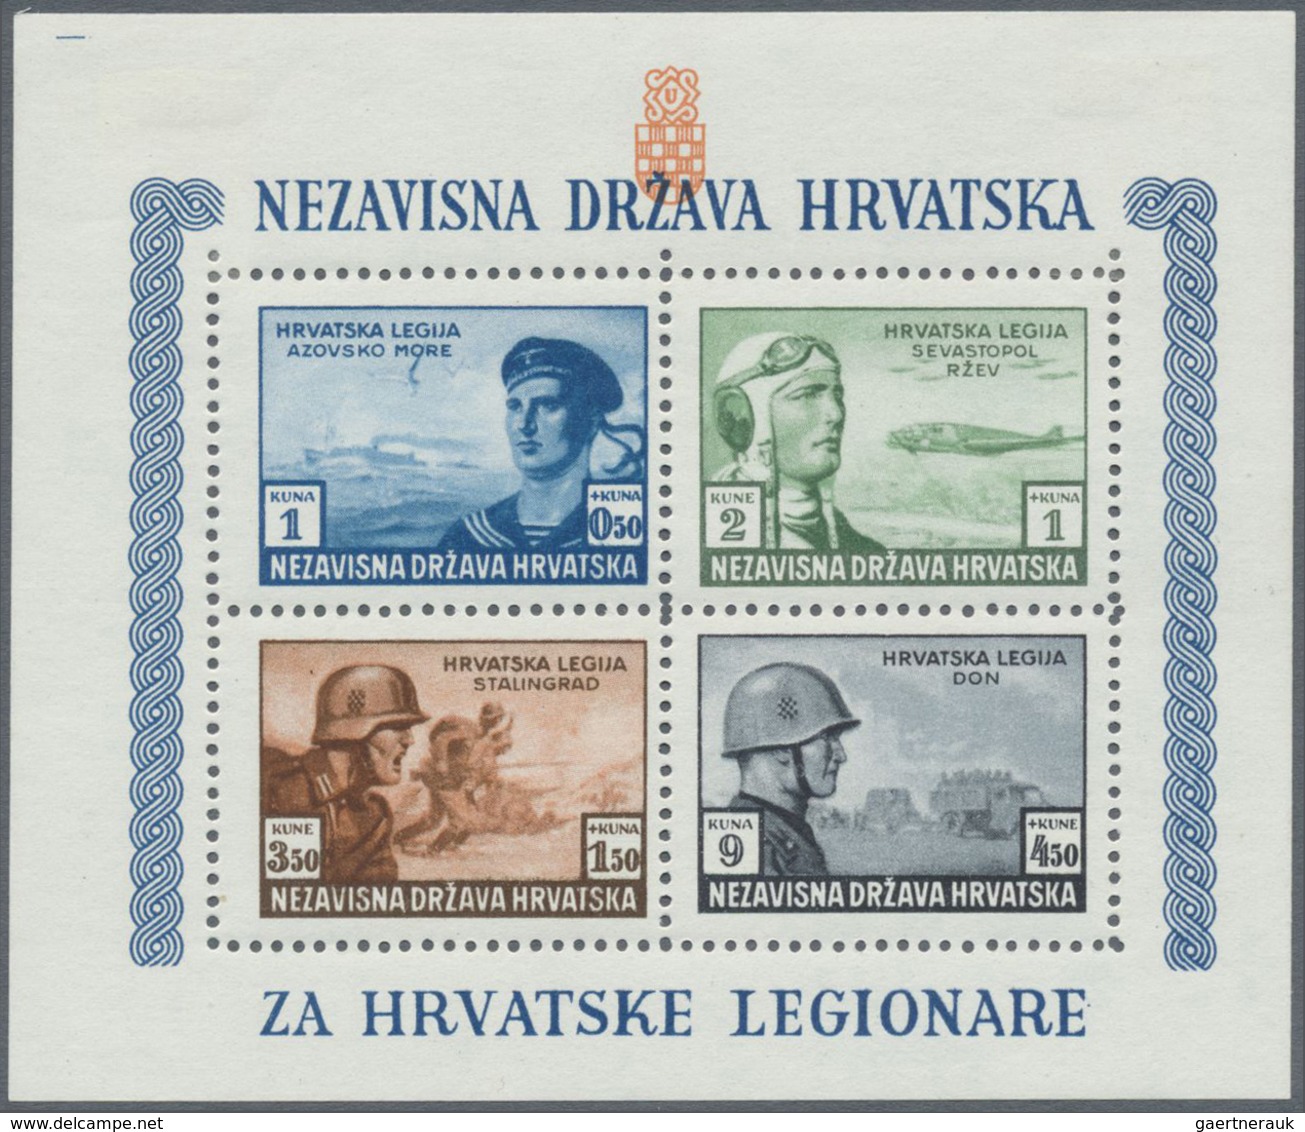 */**/O Kroatien: 1941/1945, except for a few issues complete resp overcomplete collection mint or MNH incl.